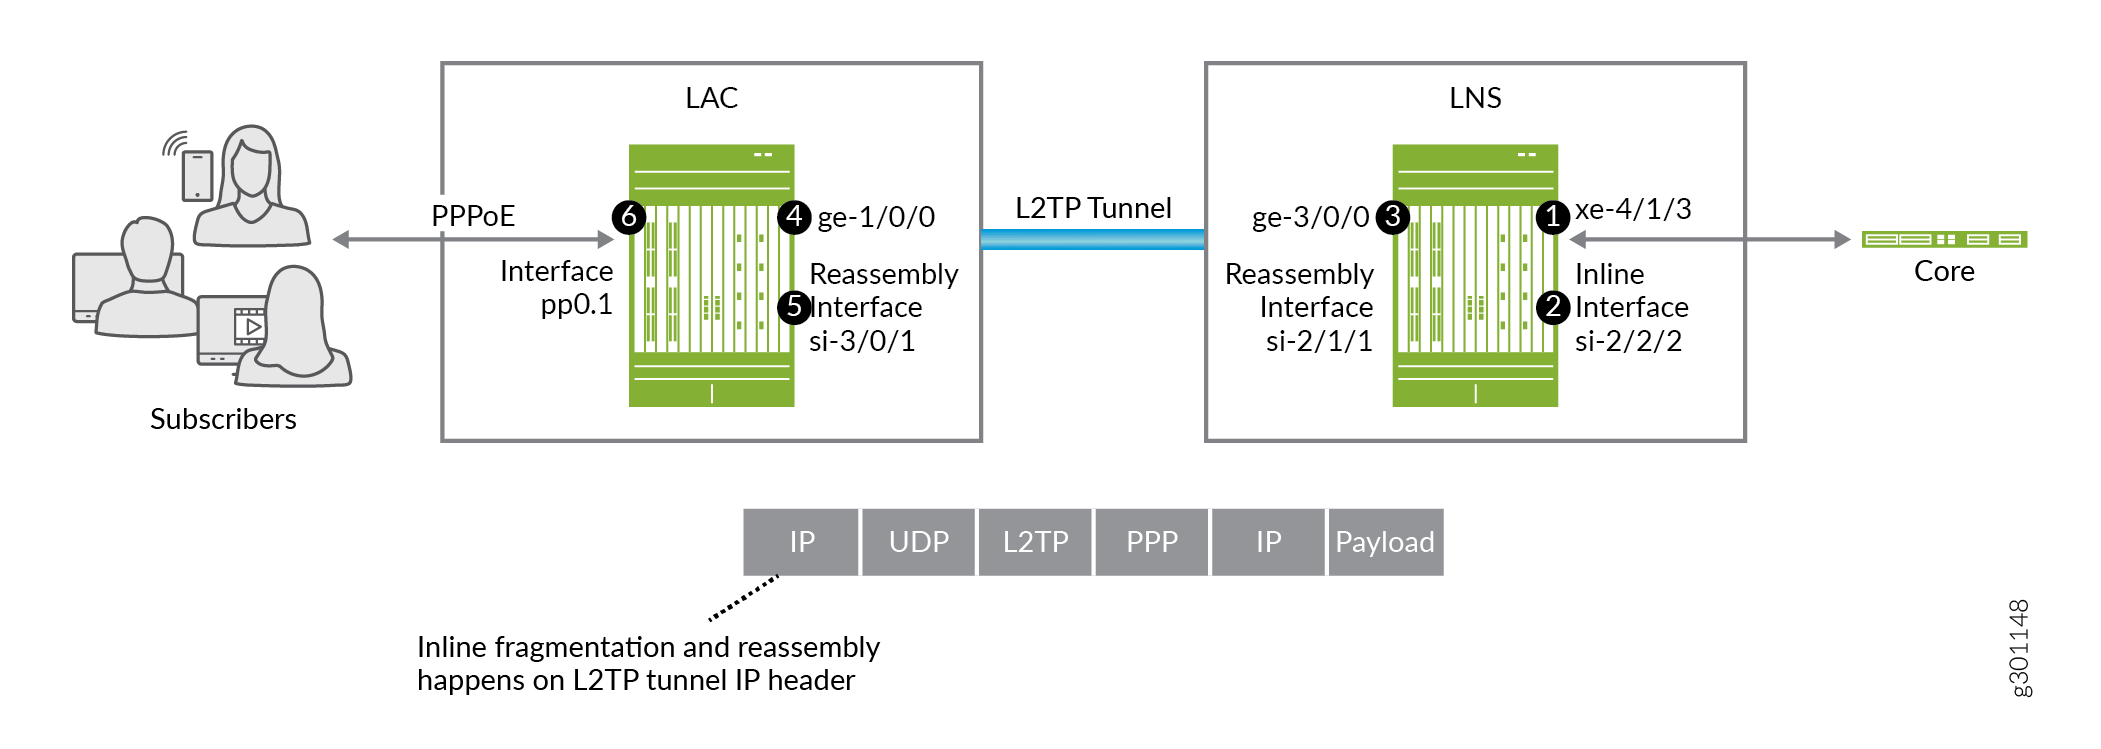 L2TP Reassembly for Outbound Traffic